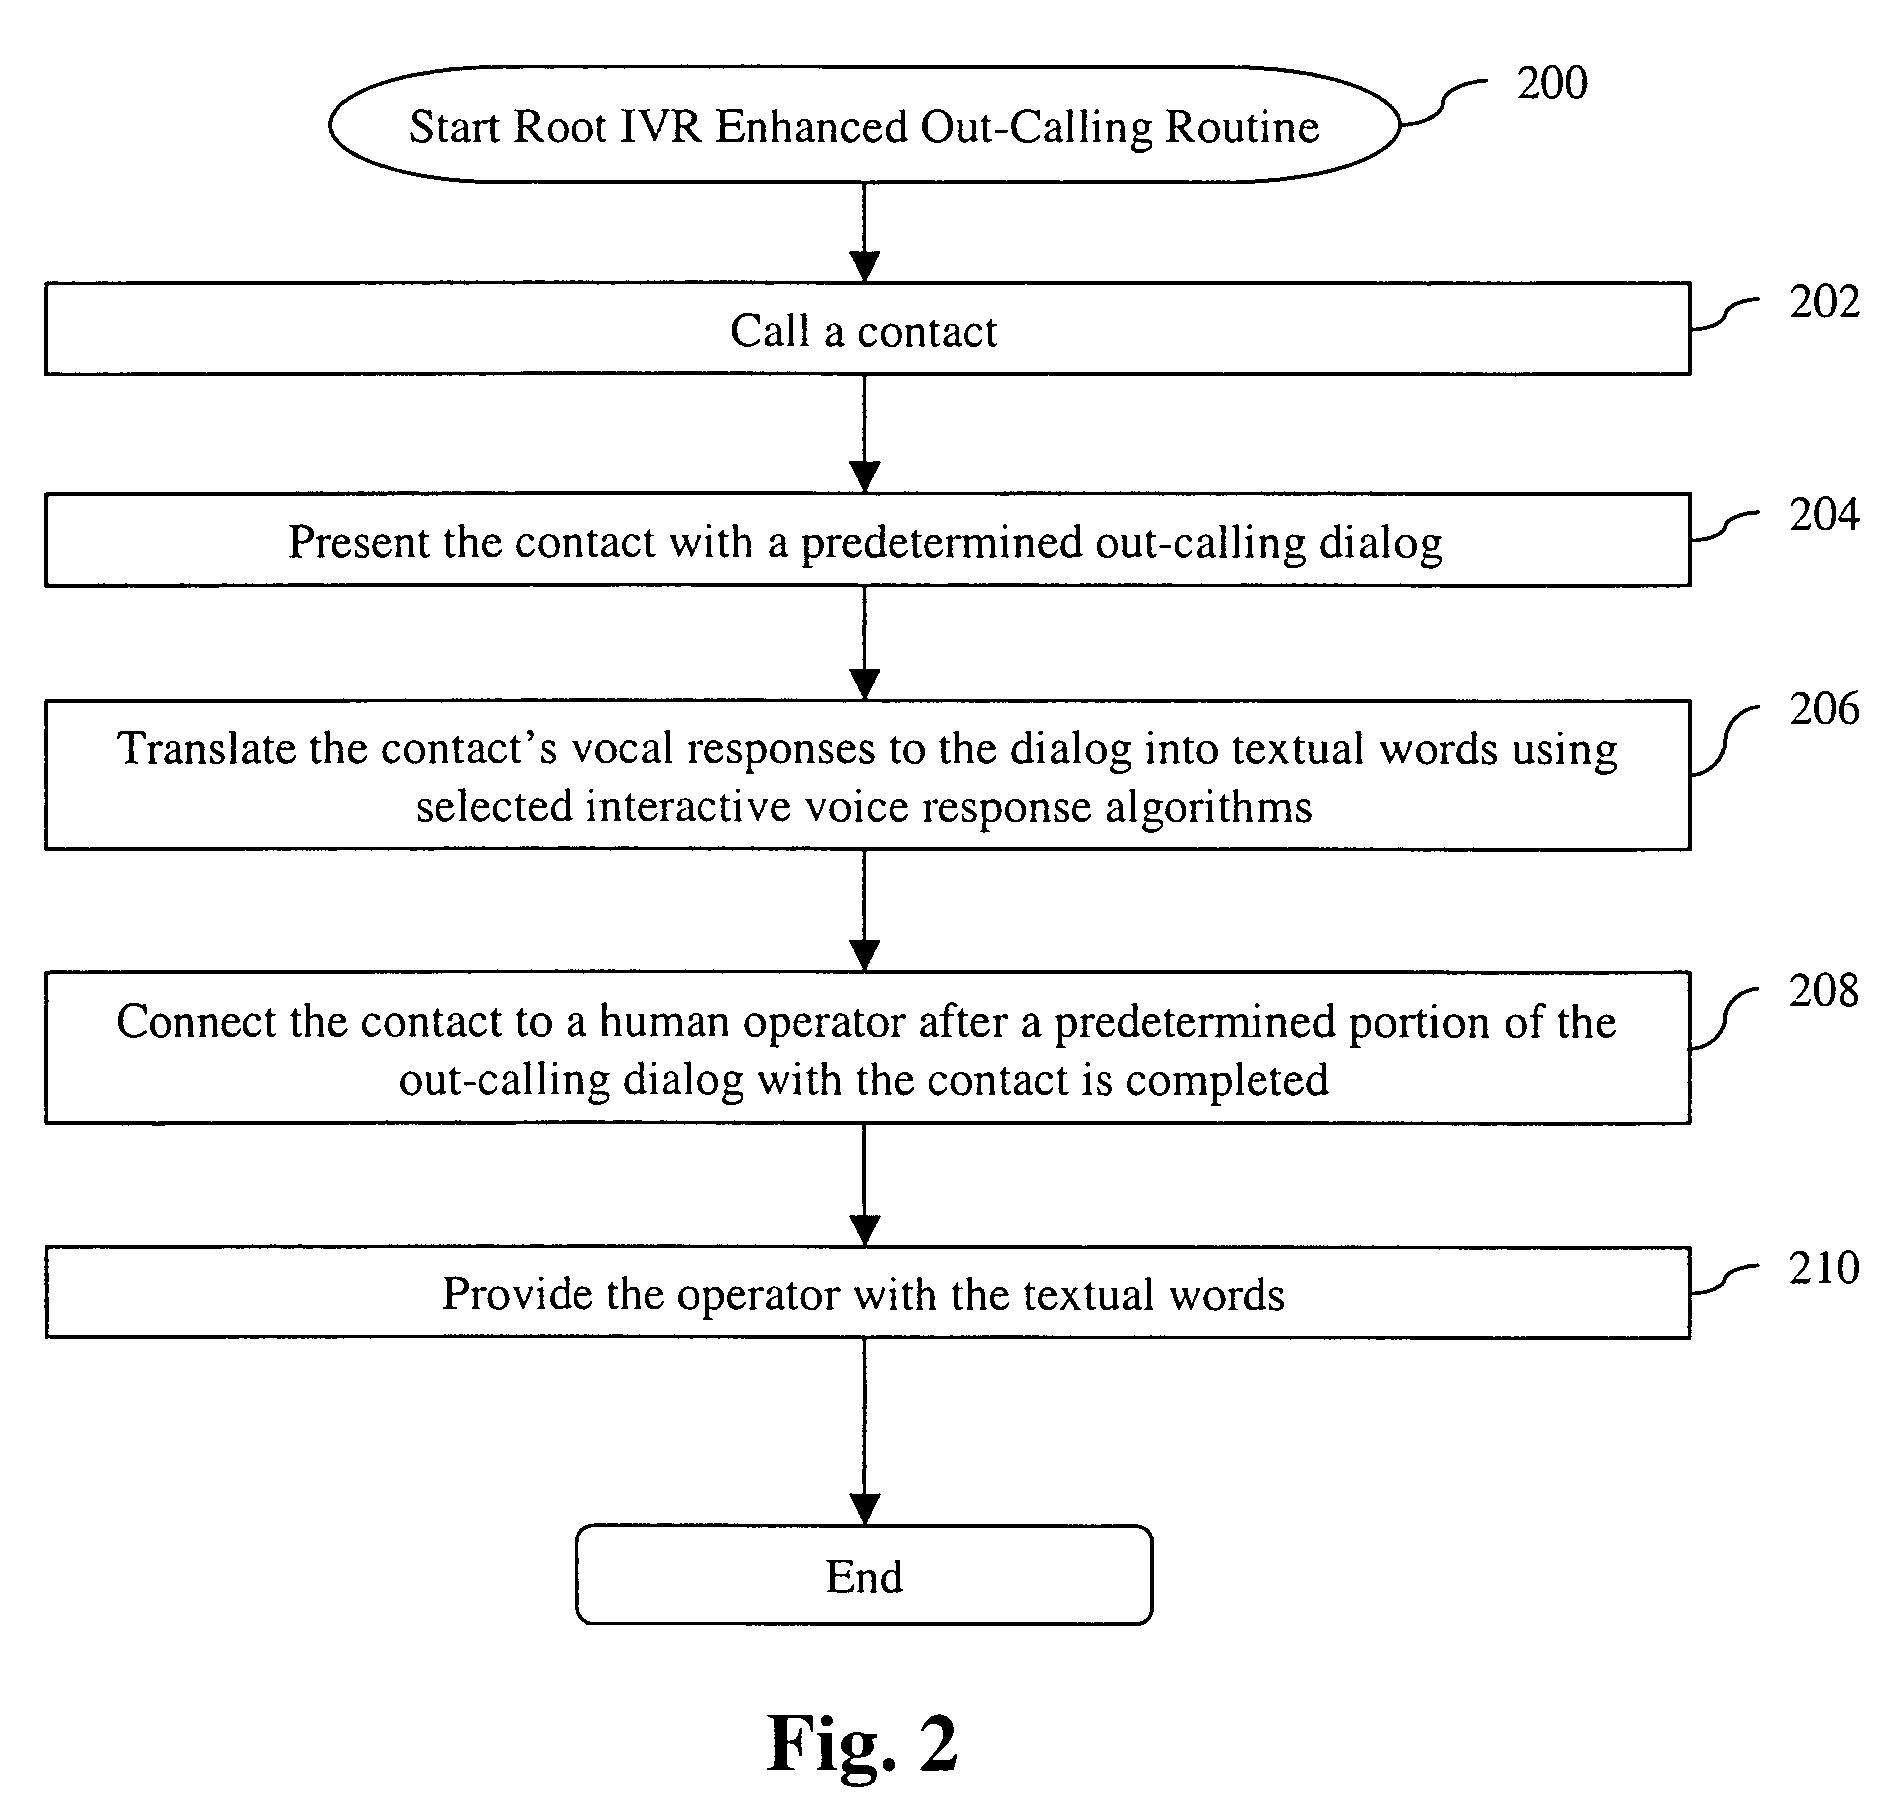 System and method for interactive voice response enhanced out-calling